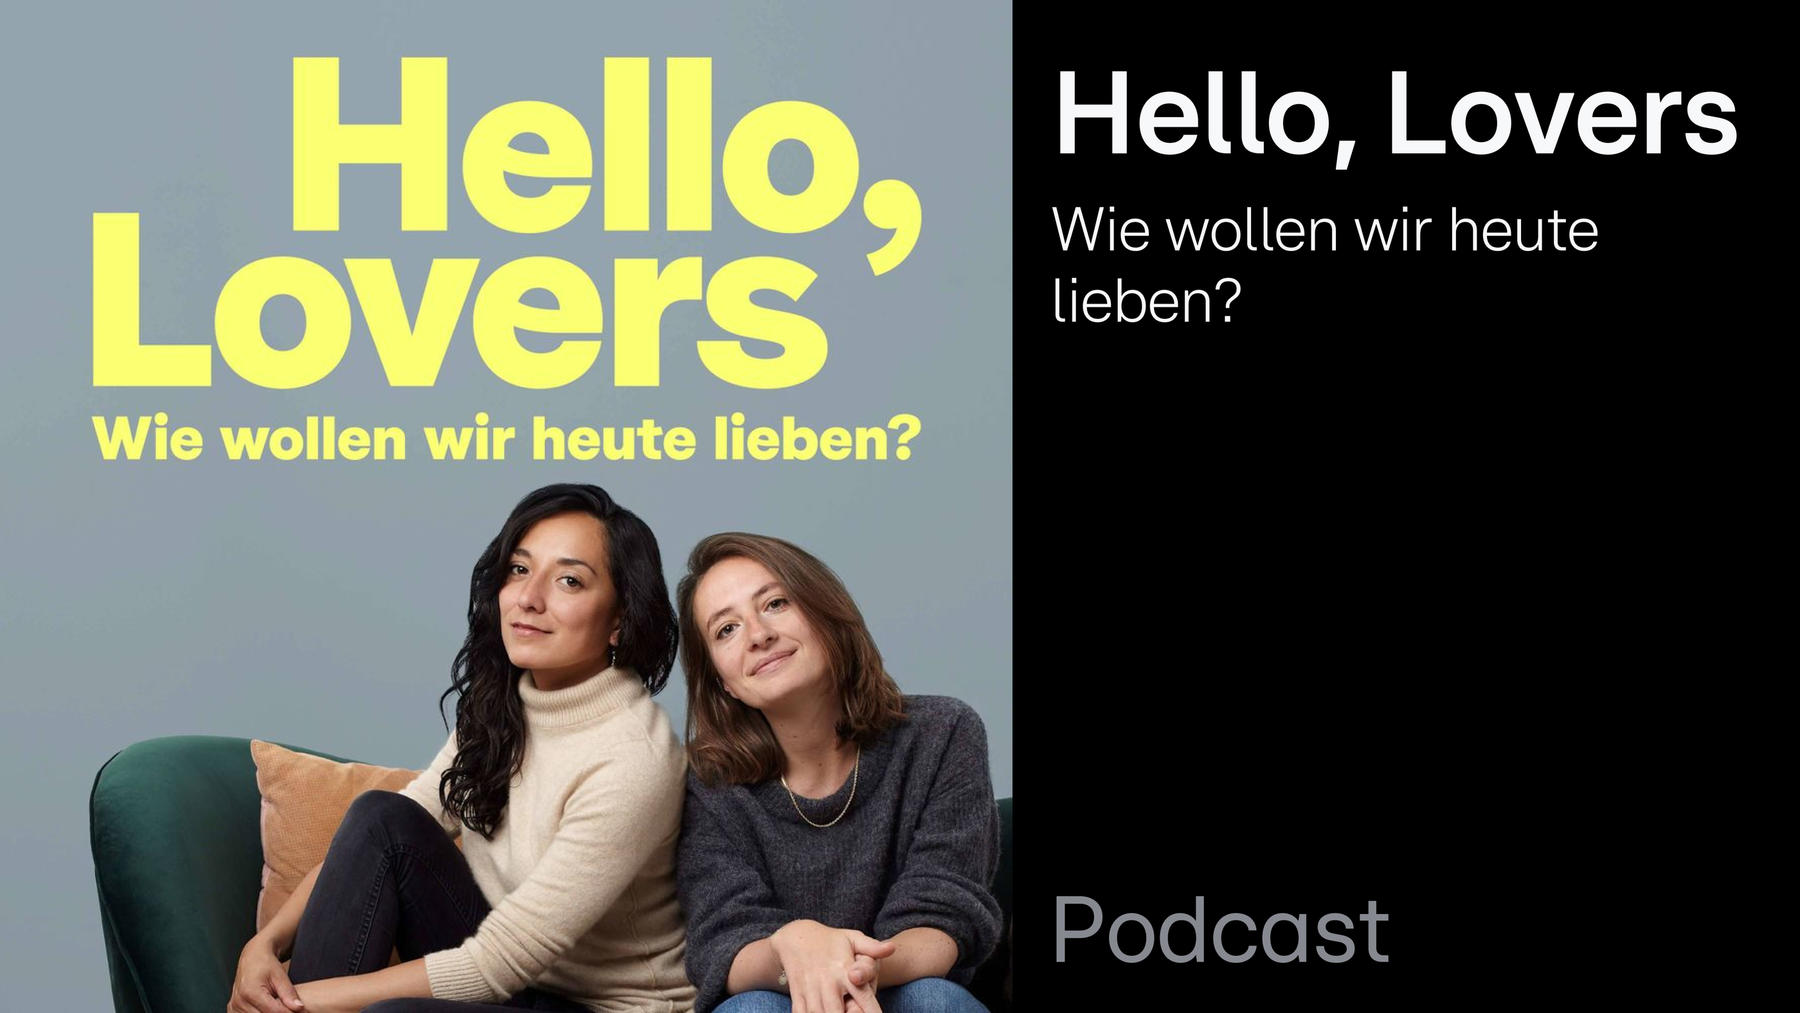 Podcast: Hello Lovers